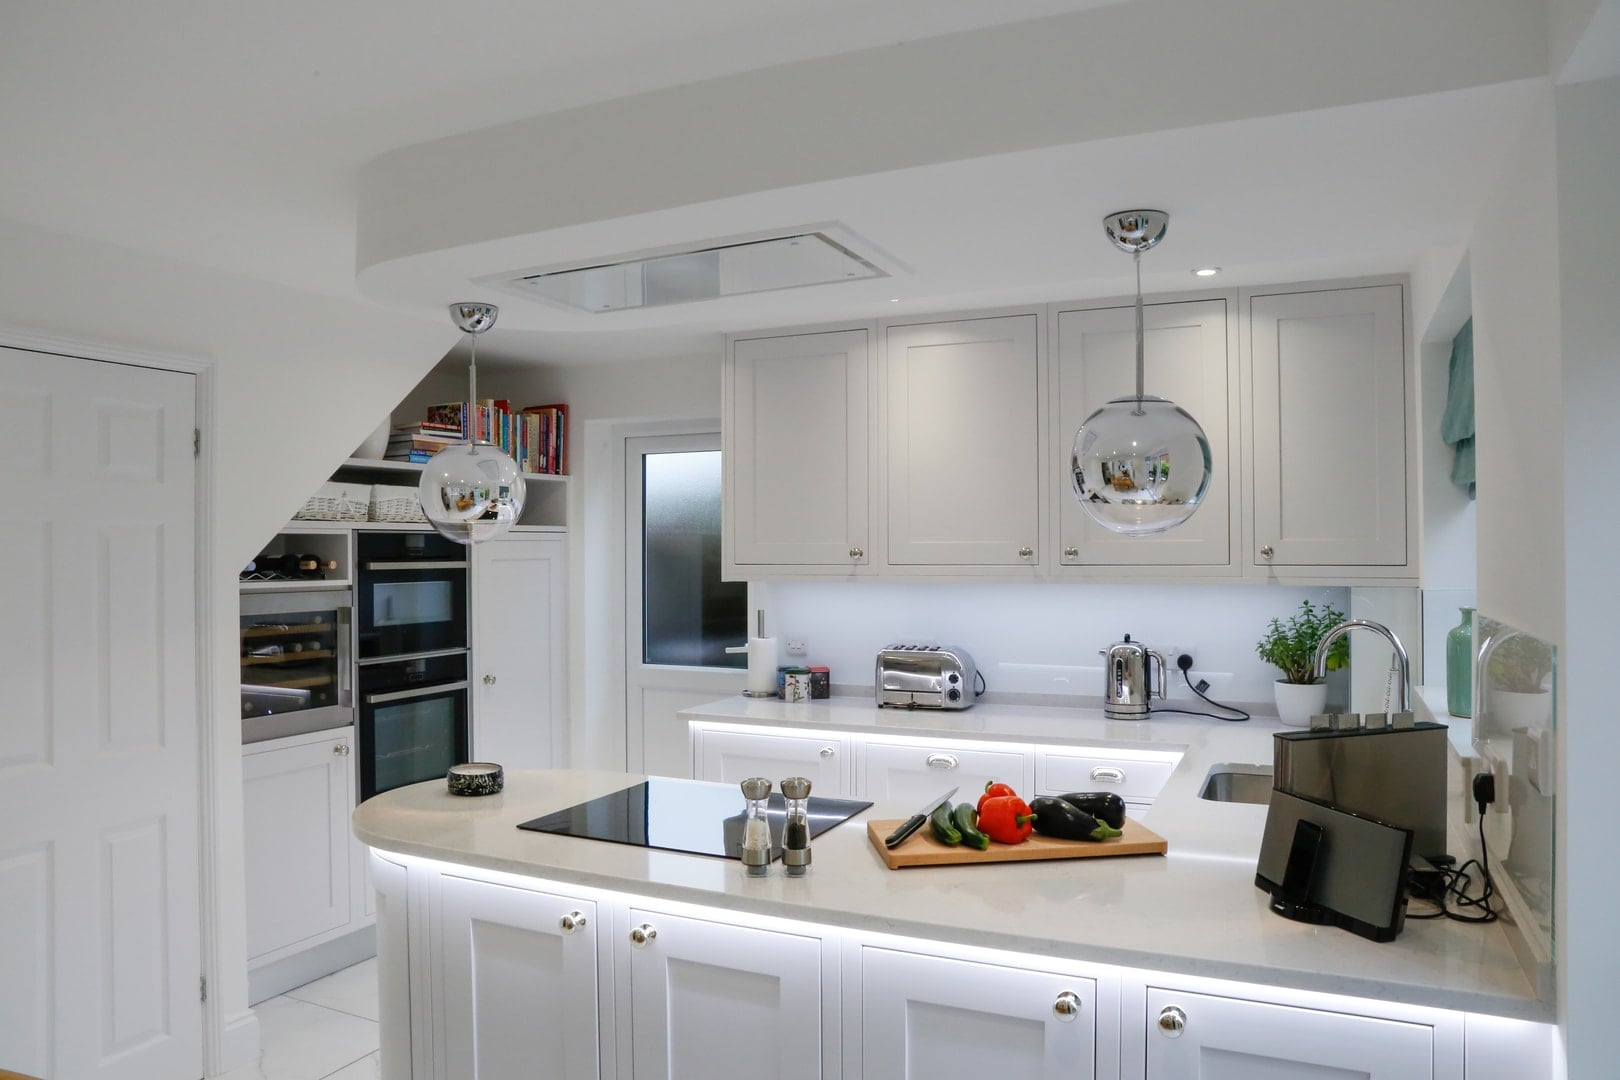 how much does it cost to have a kitchen fitted?